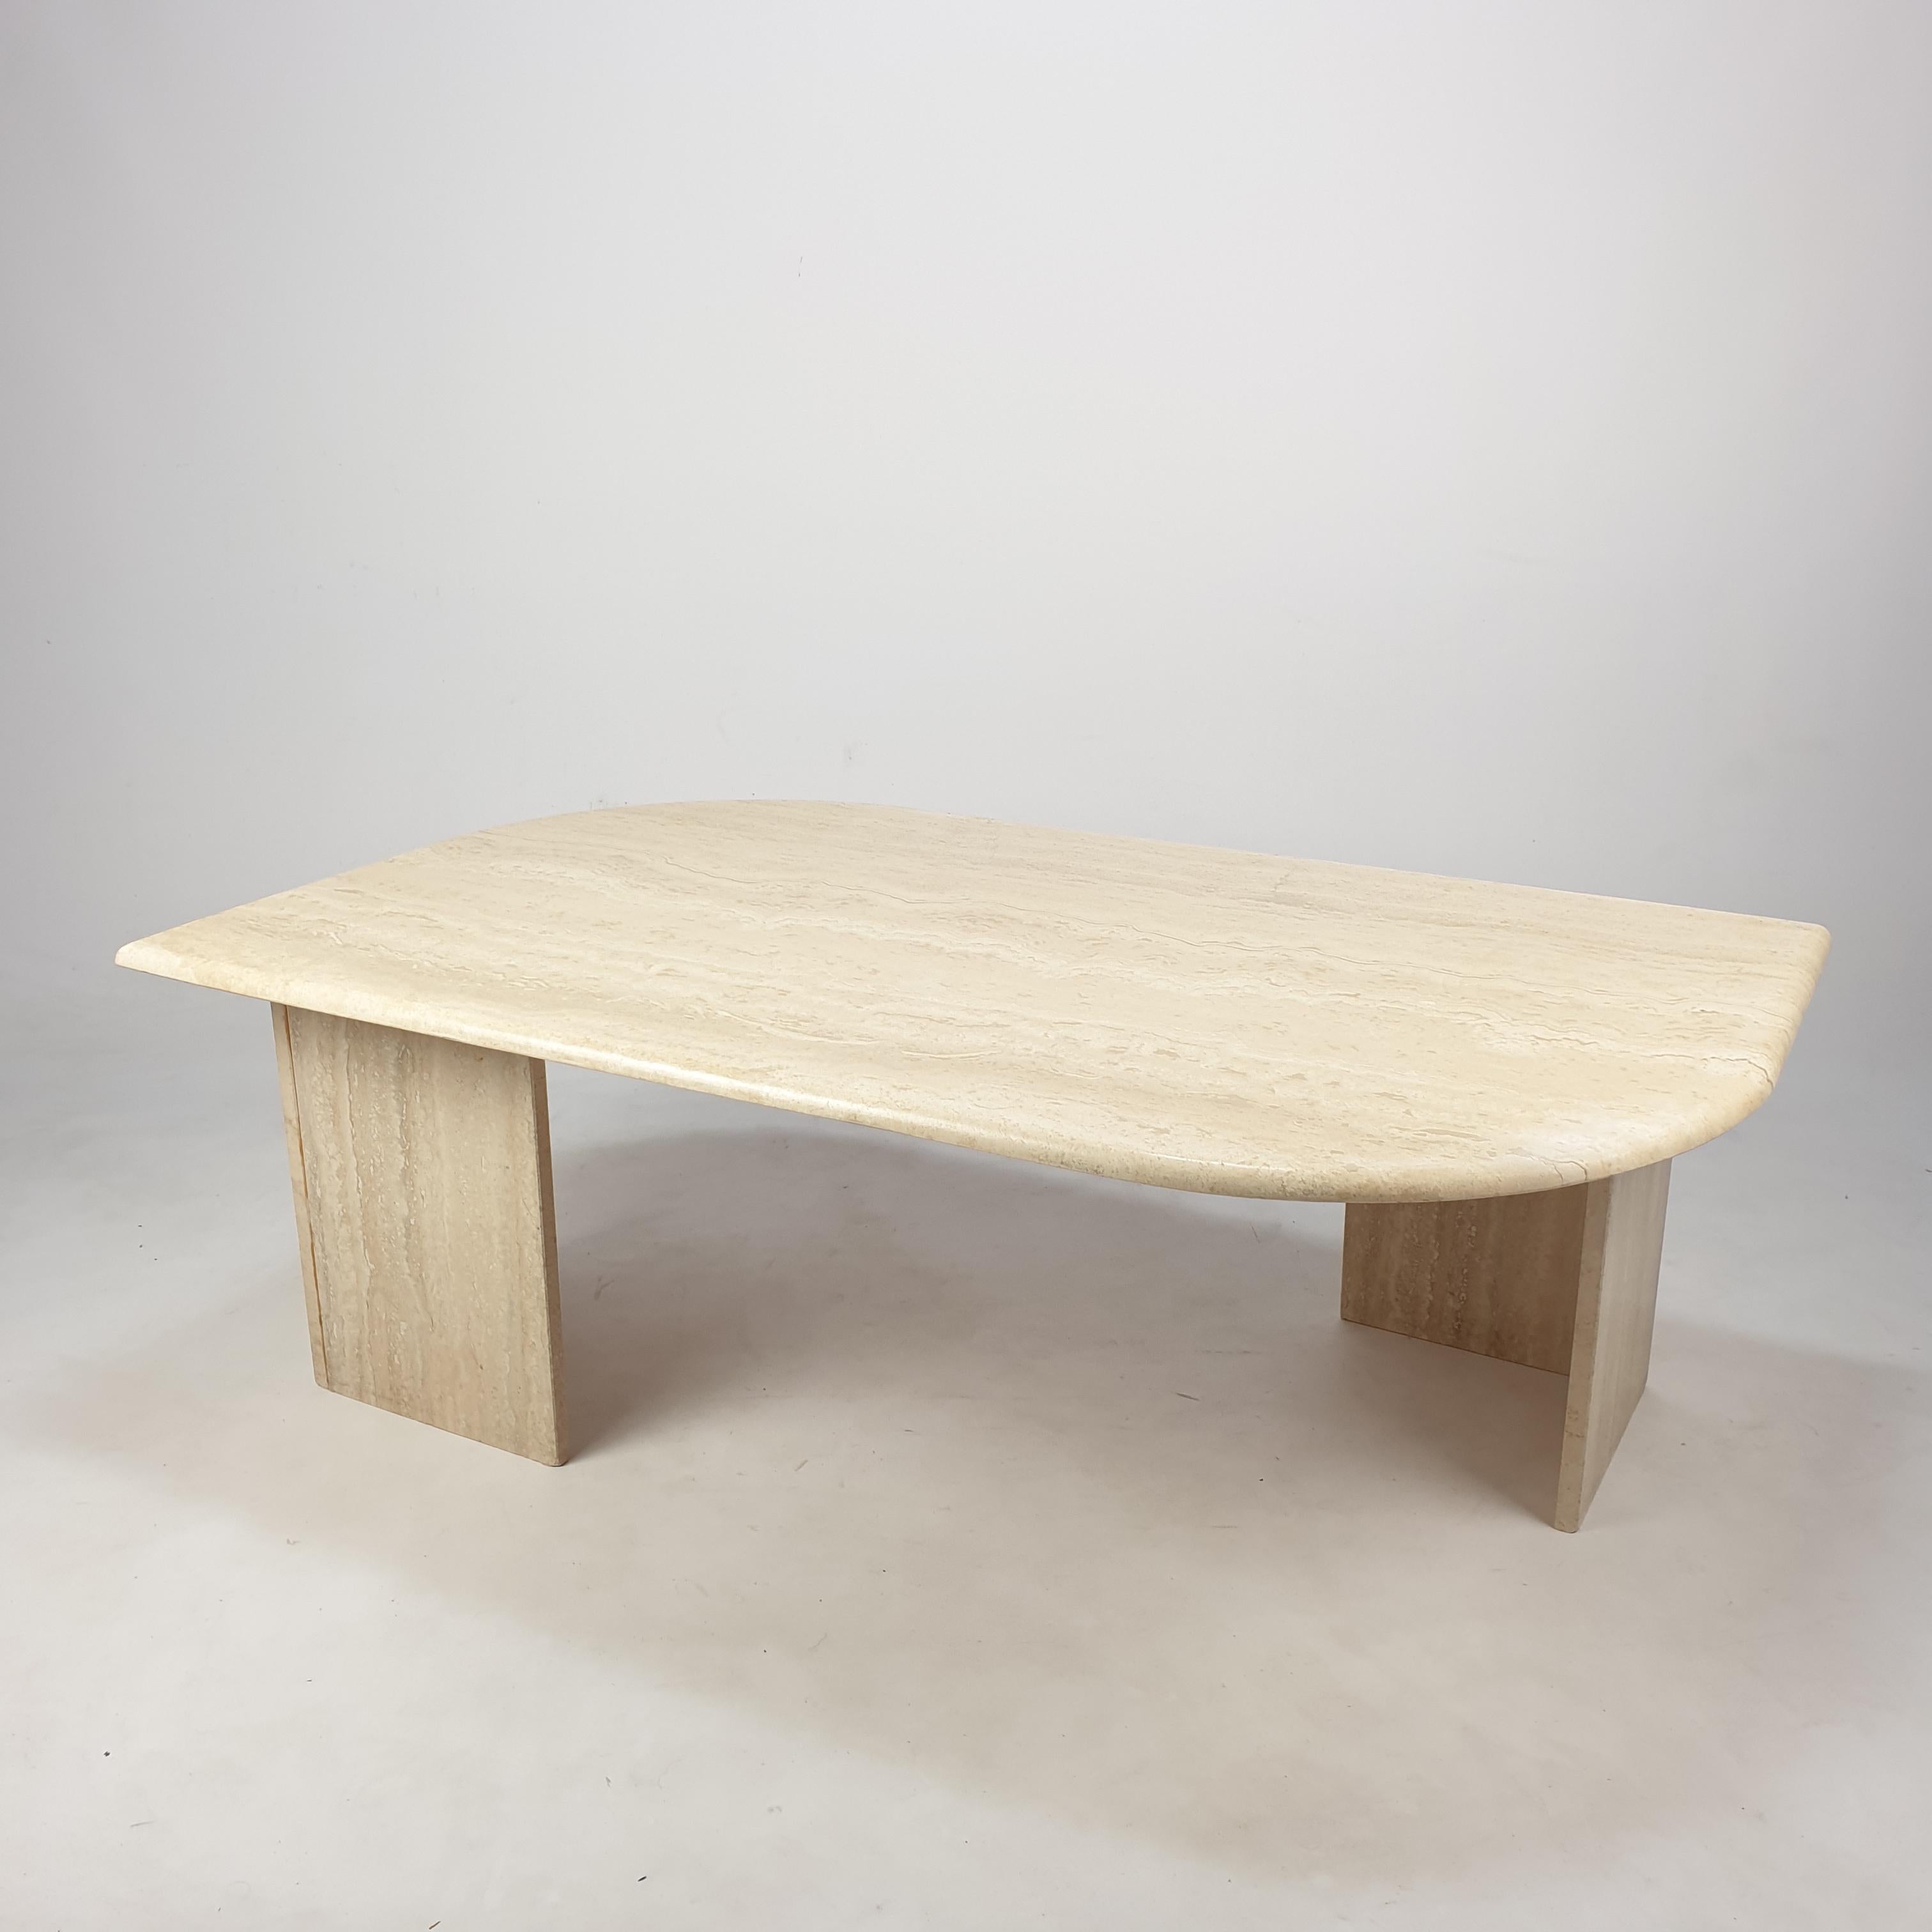 Very elegant Italian coffee table handcrafted out of travertine. The beautiful teardrop shaped top is rounded on the edge. The base is made of two separate pieces. This stunning table will make the perfect addition to any seating or living room